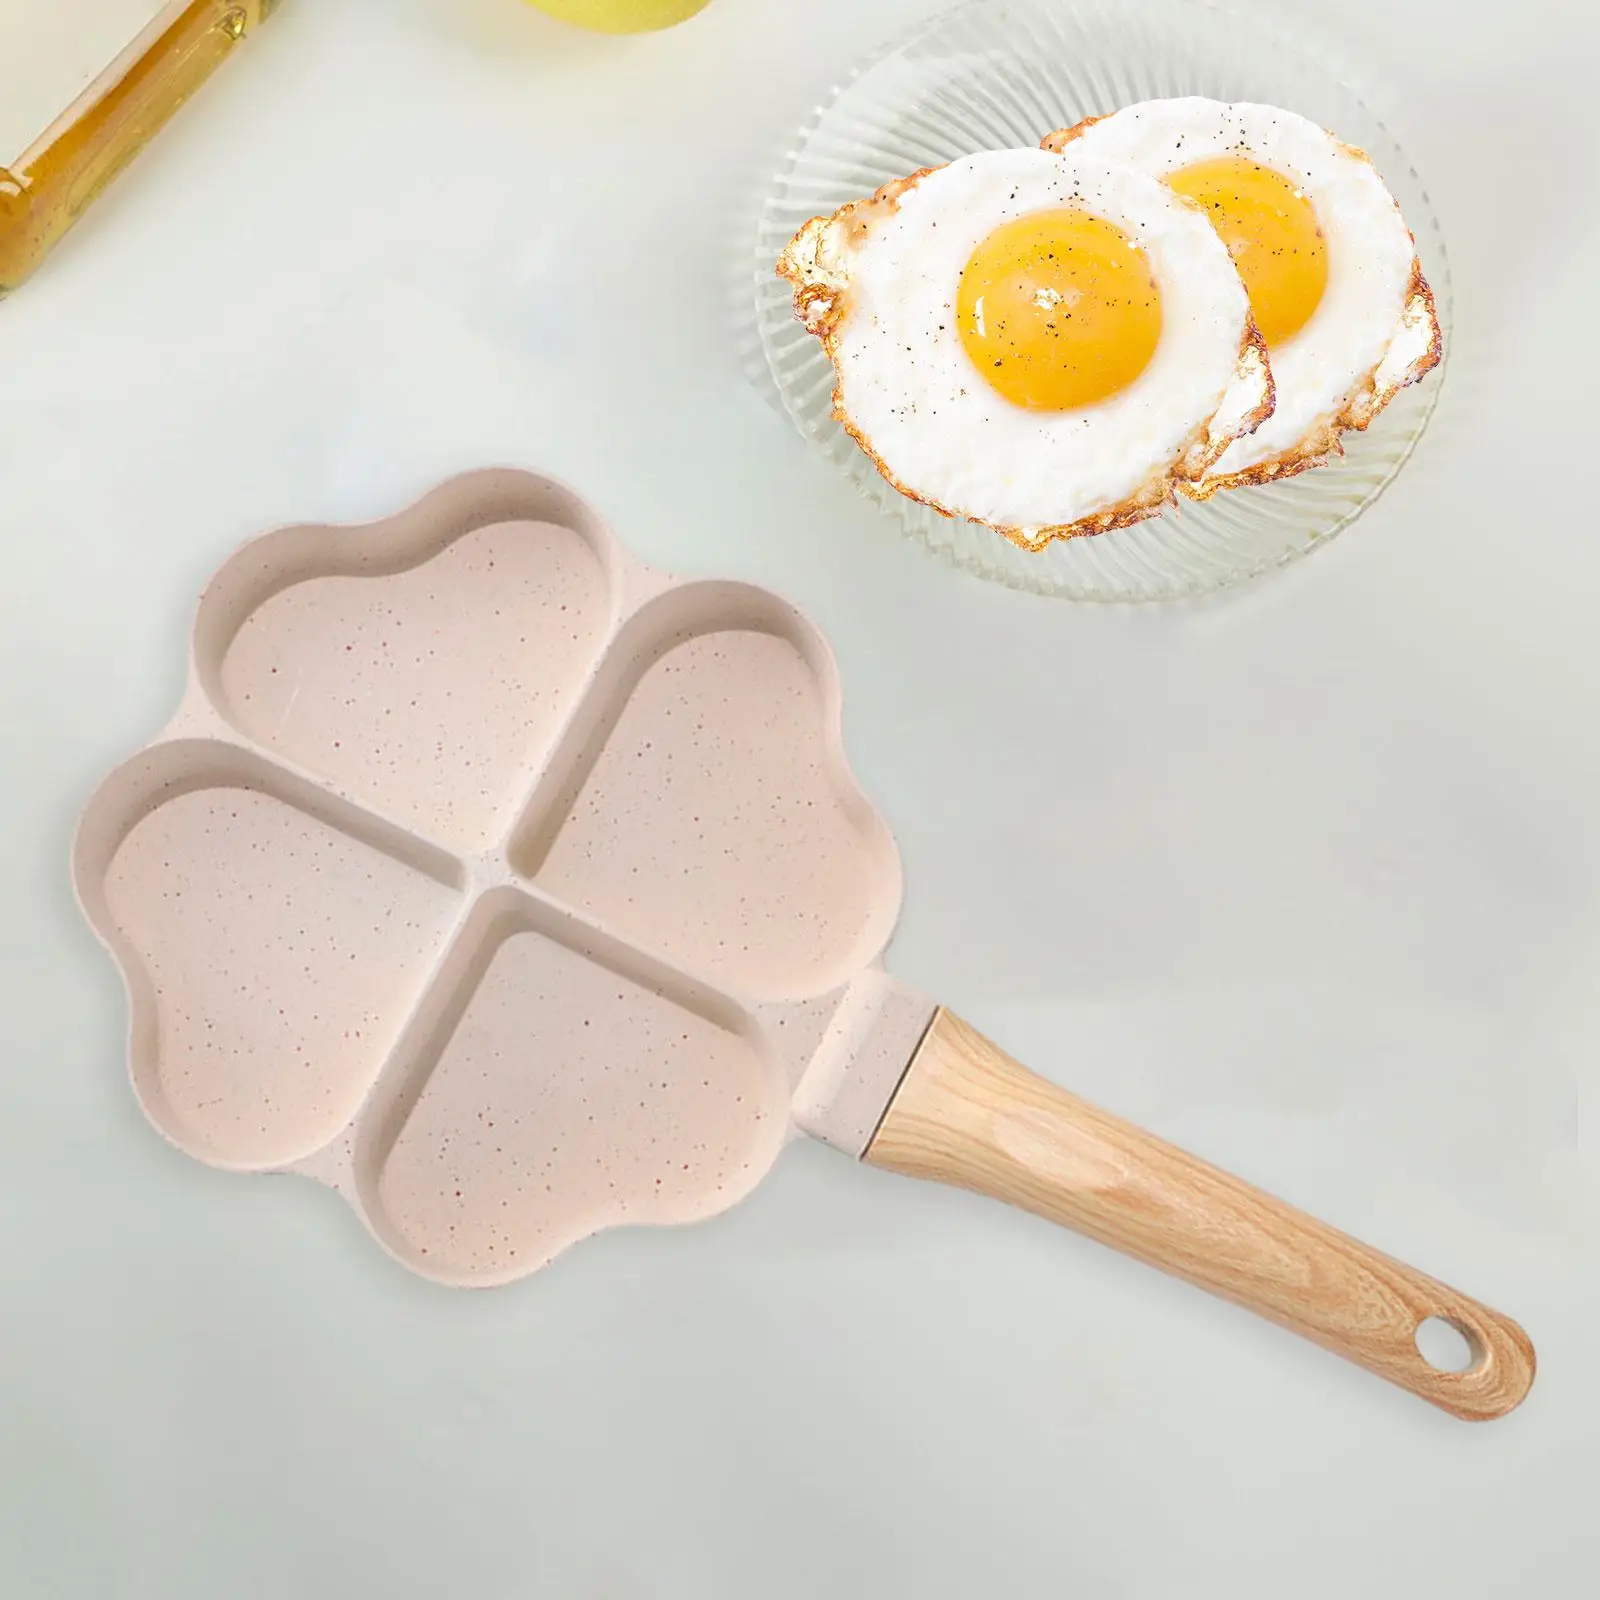 Omelet Pan Anti Scald Wood Handle Small Egg Skillet Nonstick Cookware 4 Holes Mini Egg Cooker Pan for Baking Cooking Burger